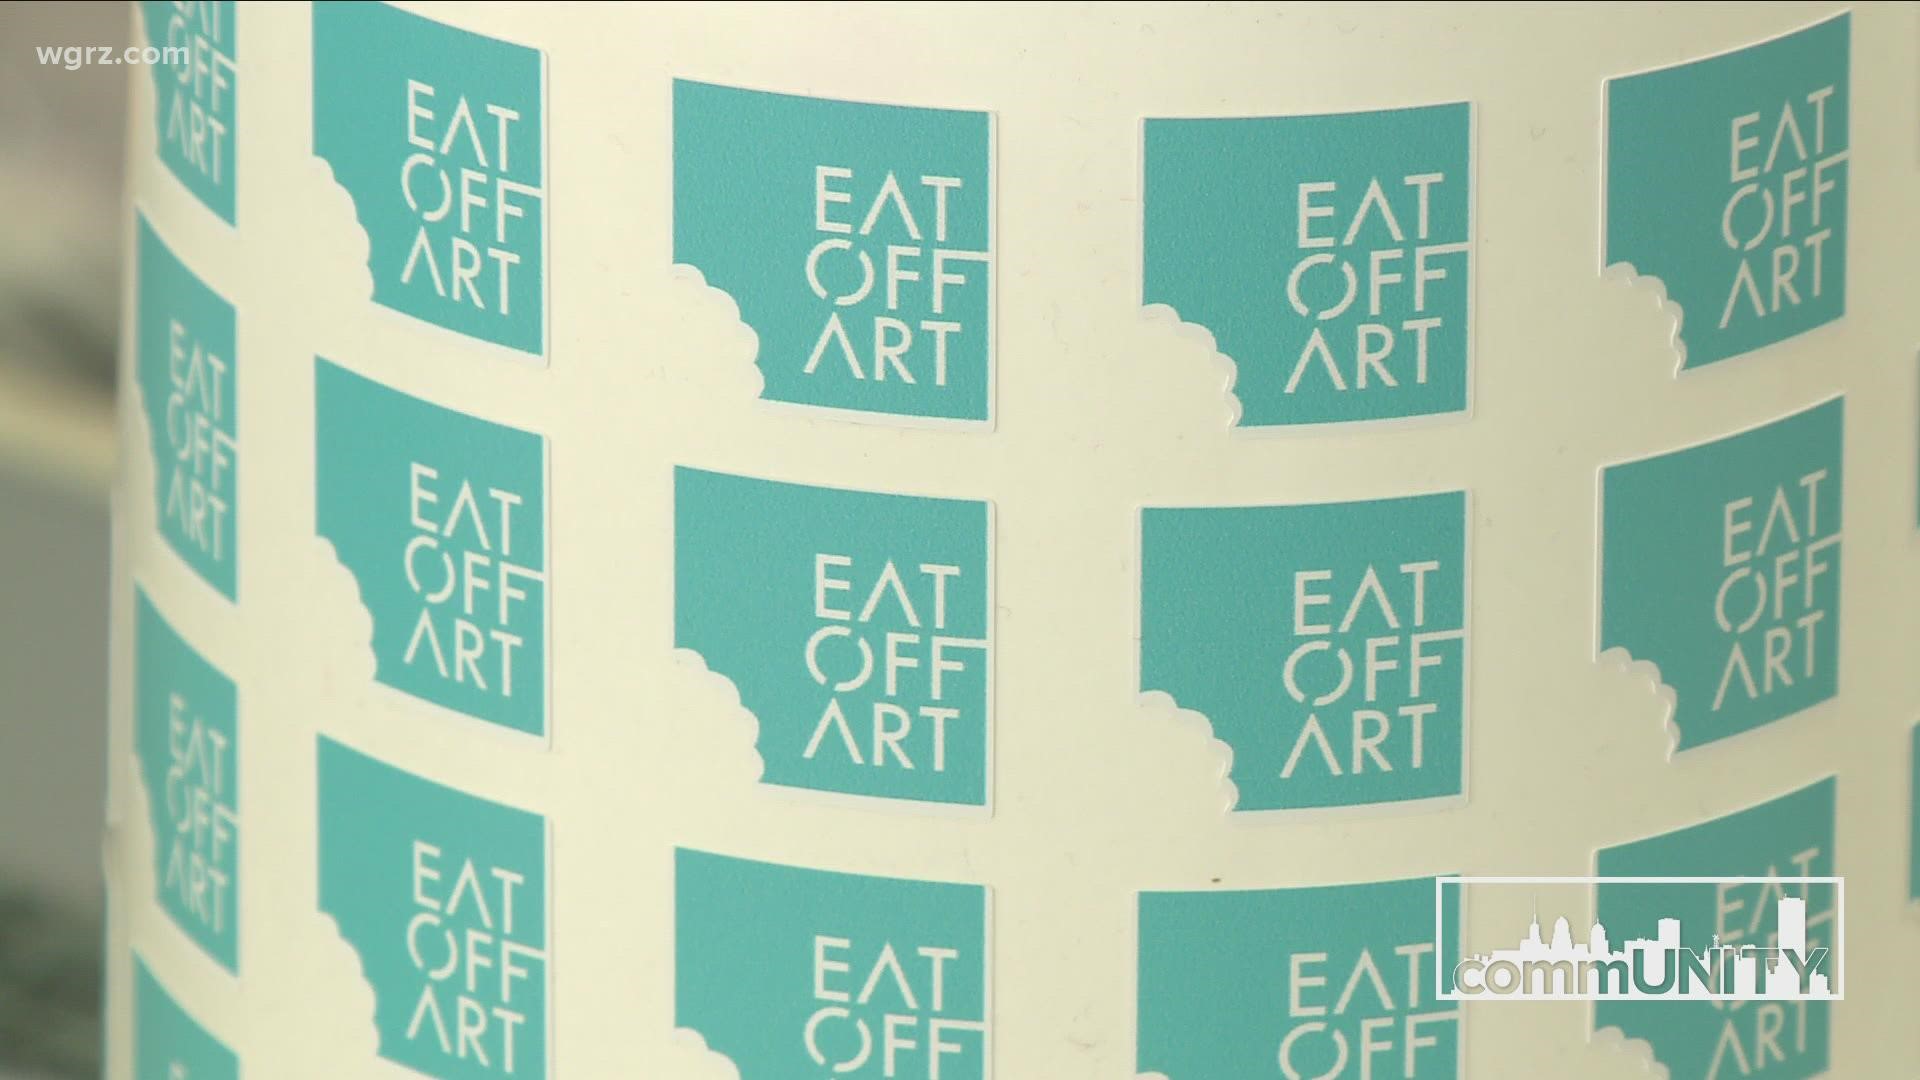 On Fridays and Saturdays this month and in December, you can check out Eat Off Art at their retail location on Ellicott Street, near Chippewa Street.